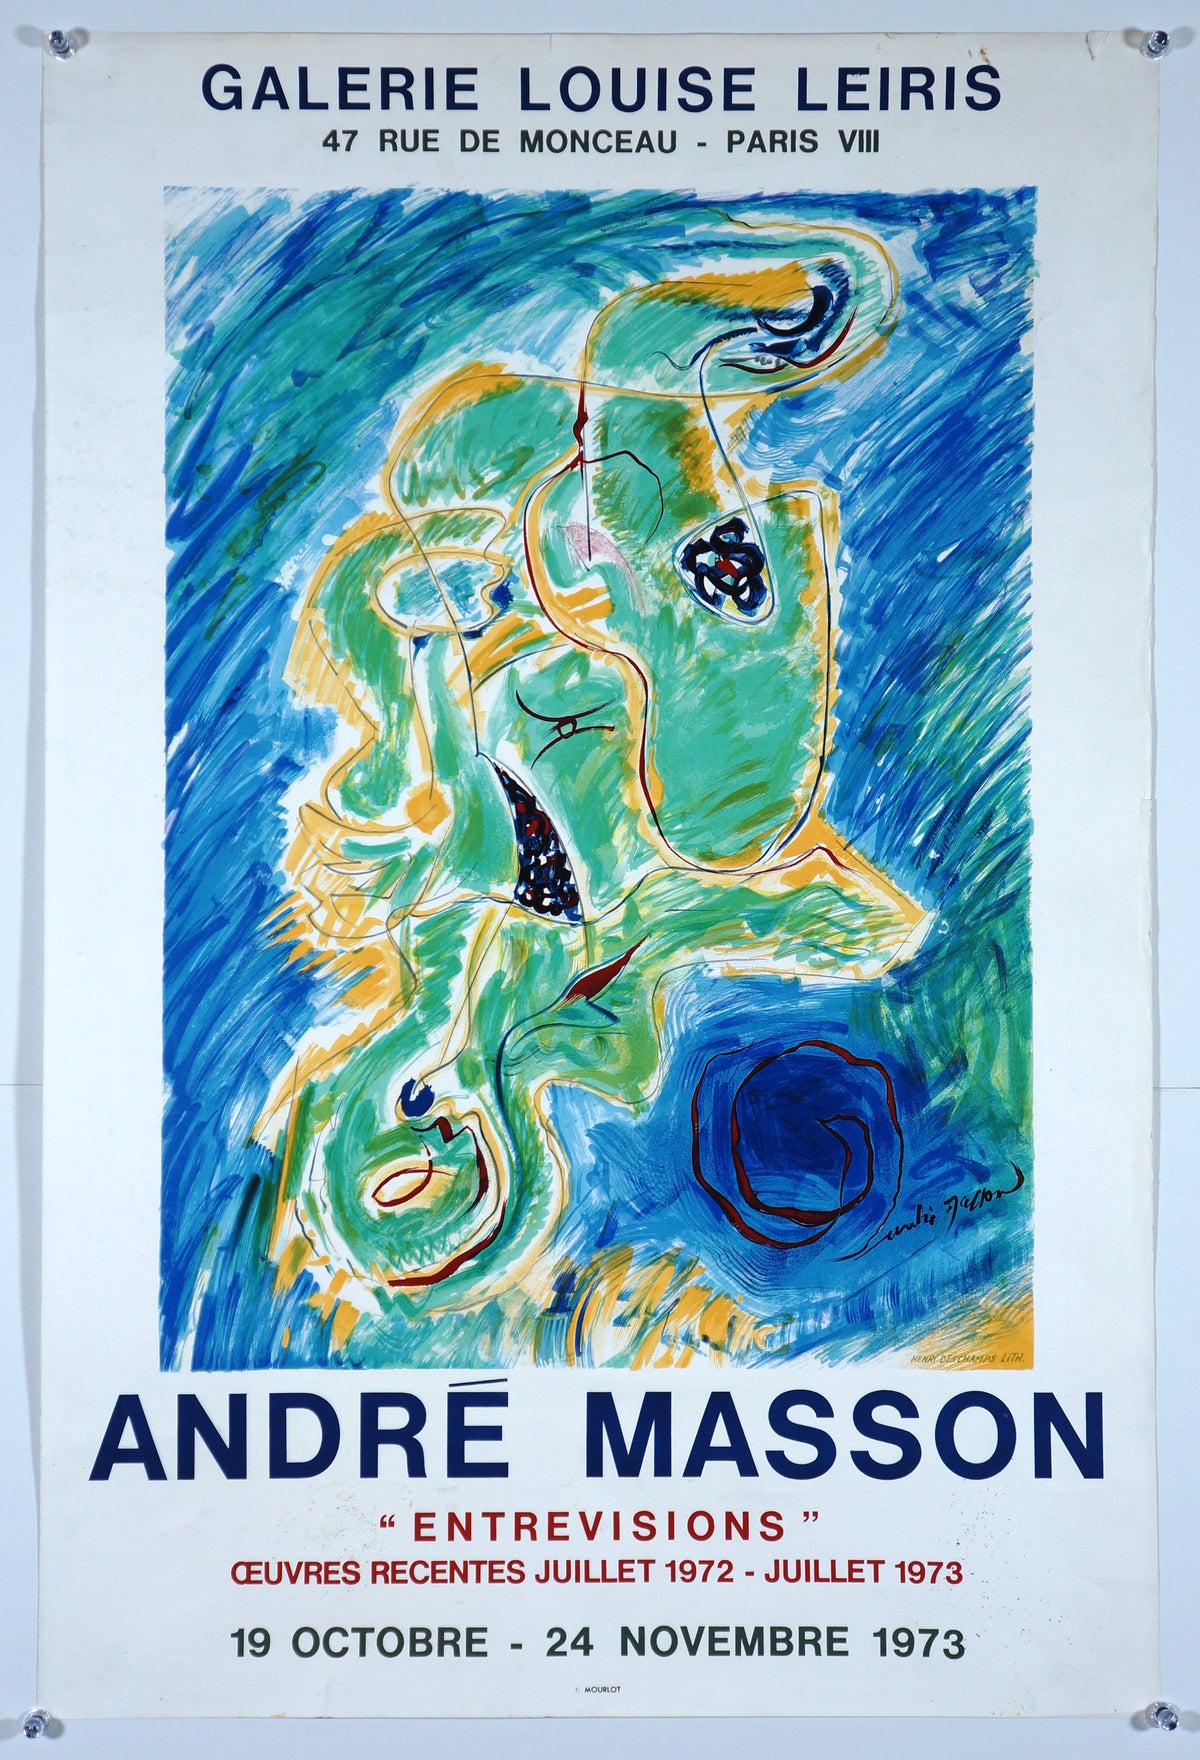 Andre Masson, Galerie Louise Leiris - Authentic Vintage Poster